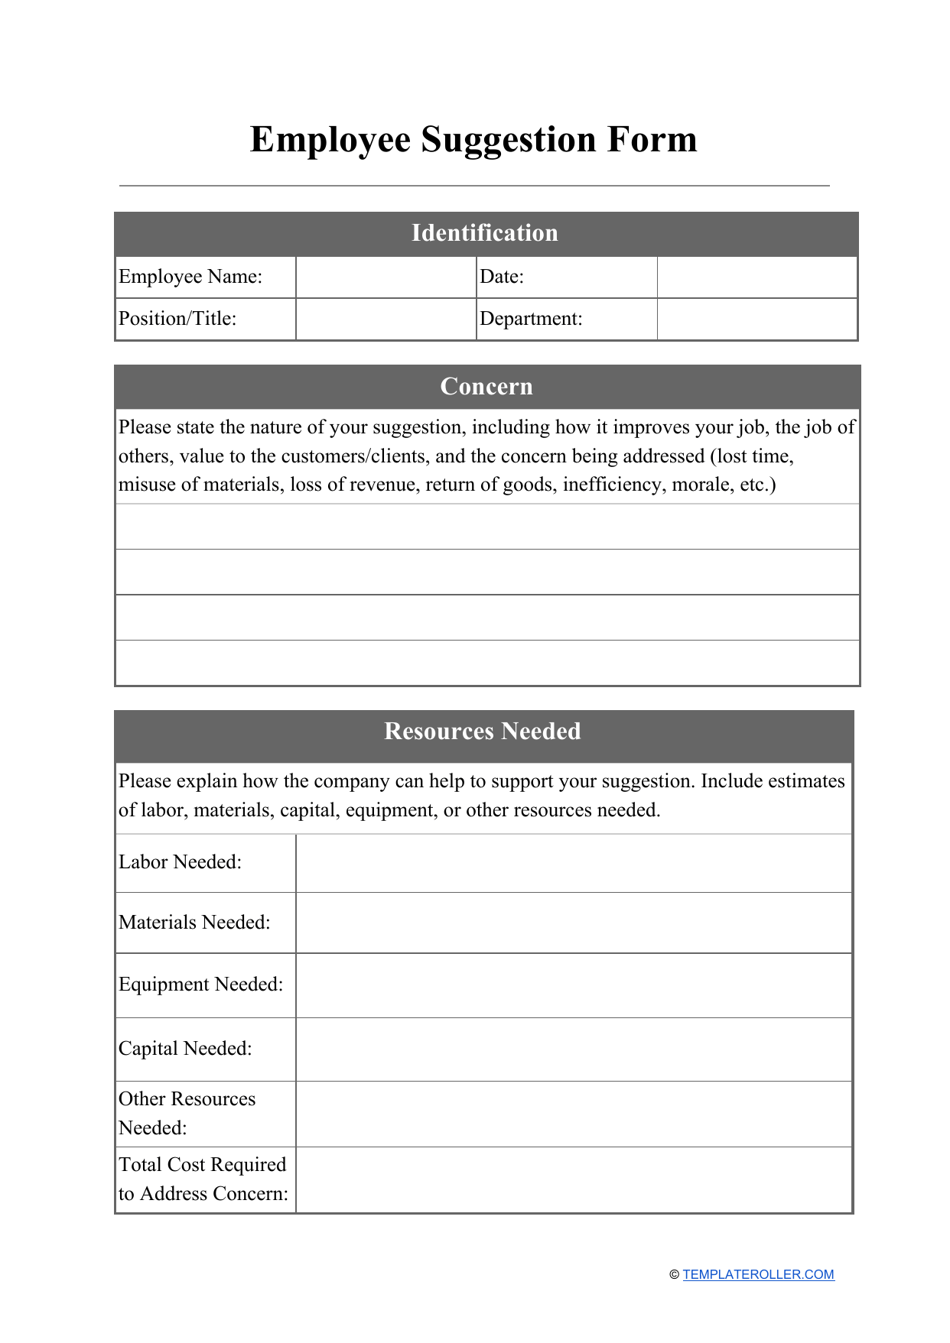 Employee Suggestion Form, Page 1